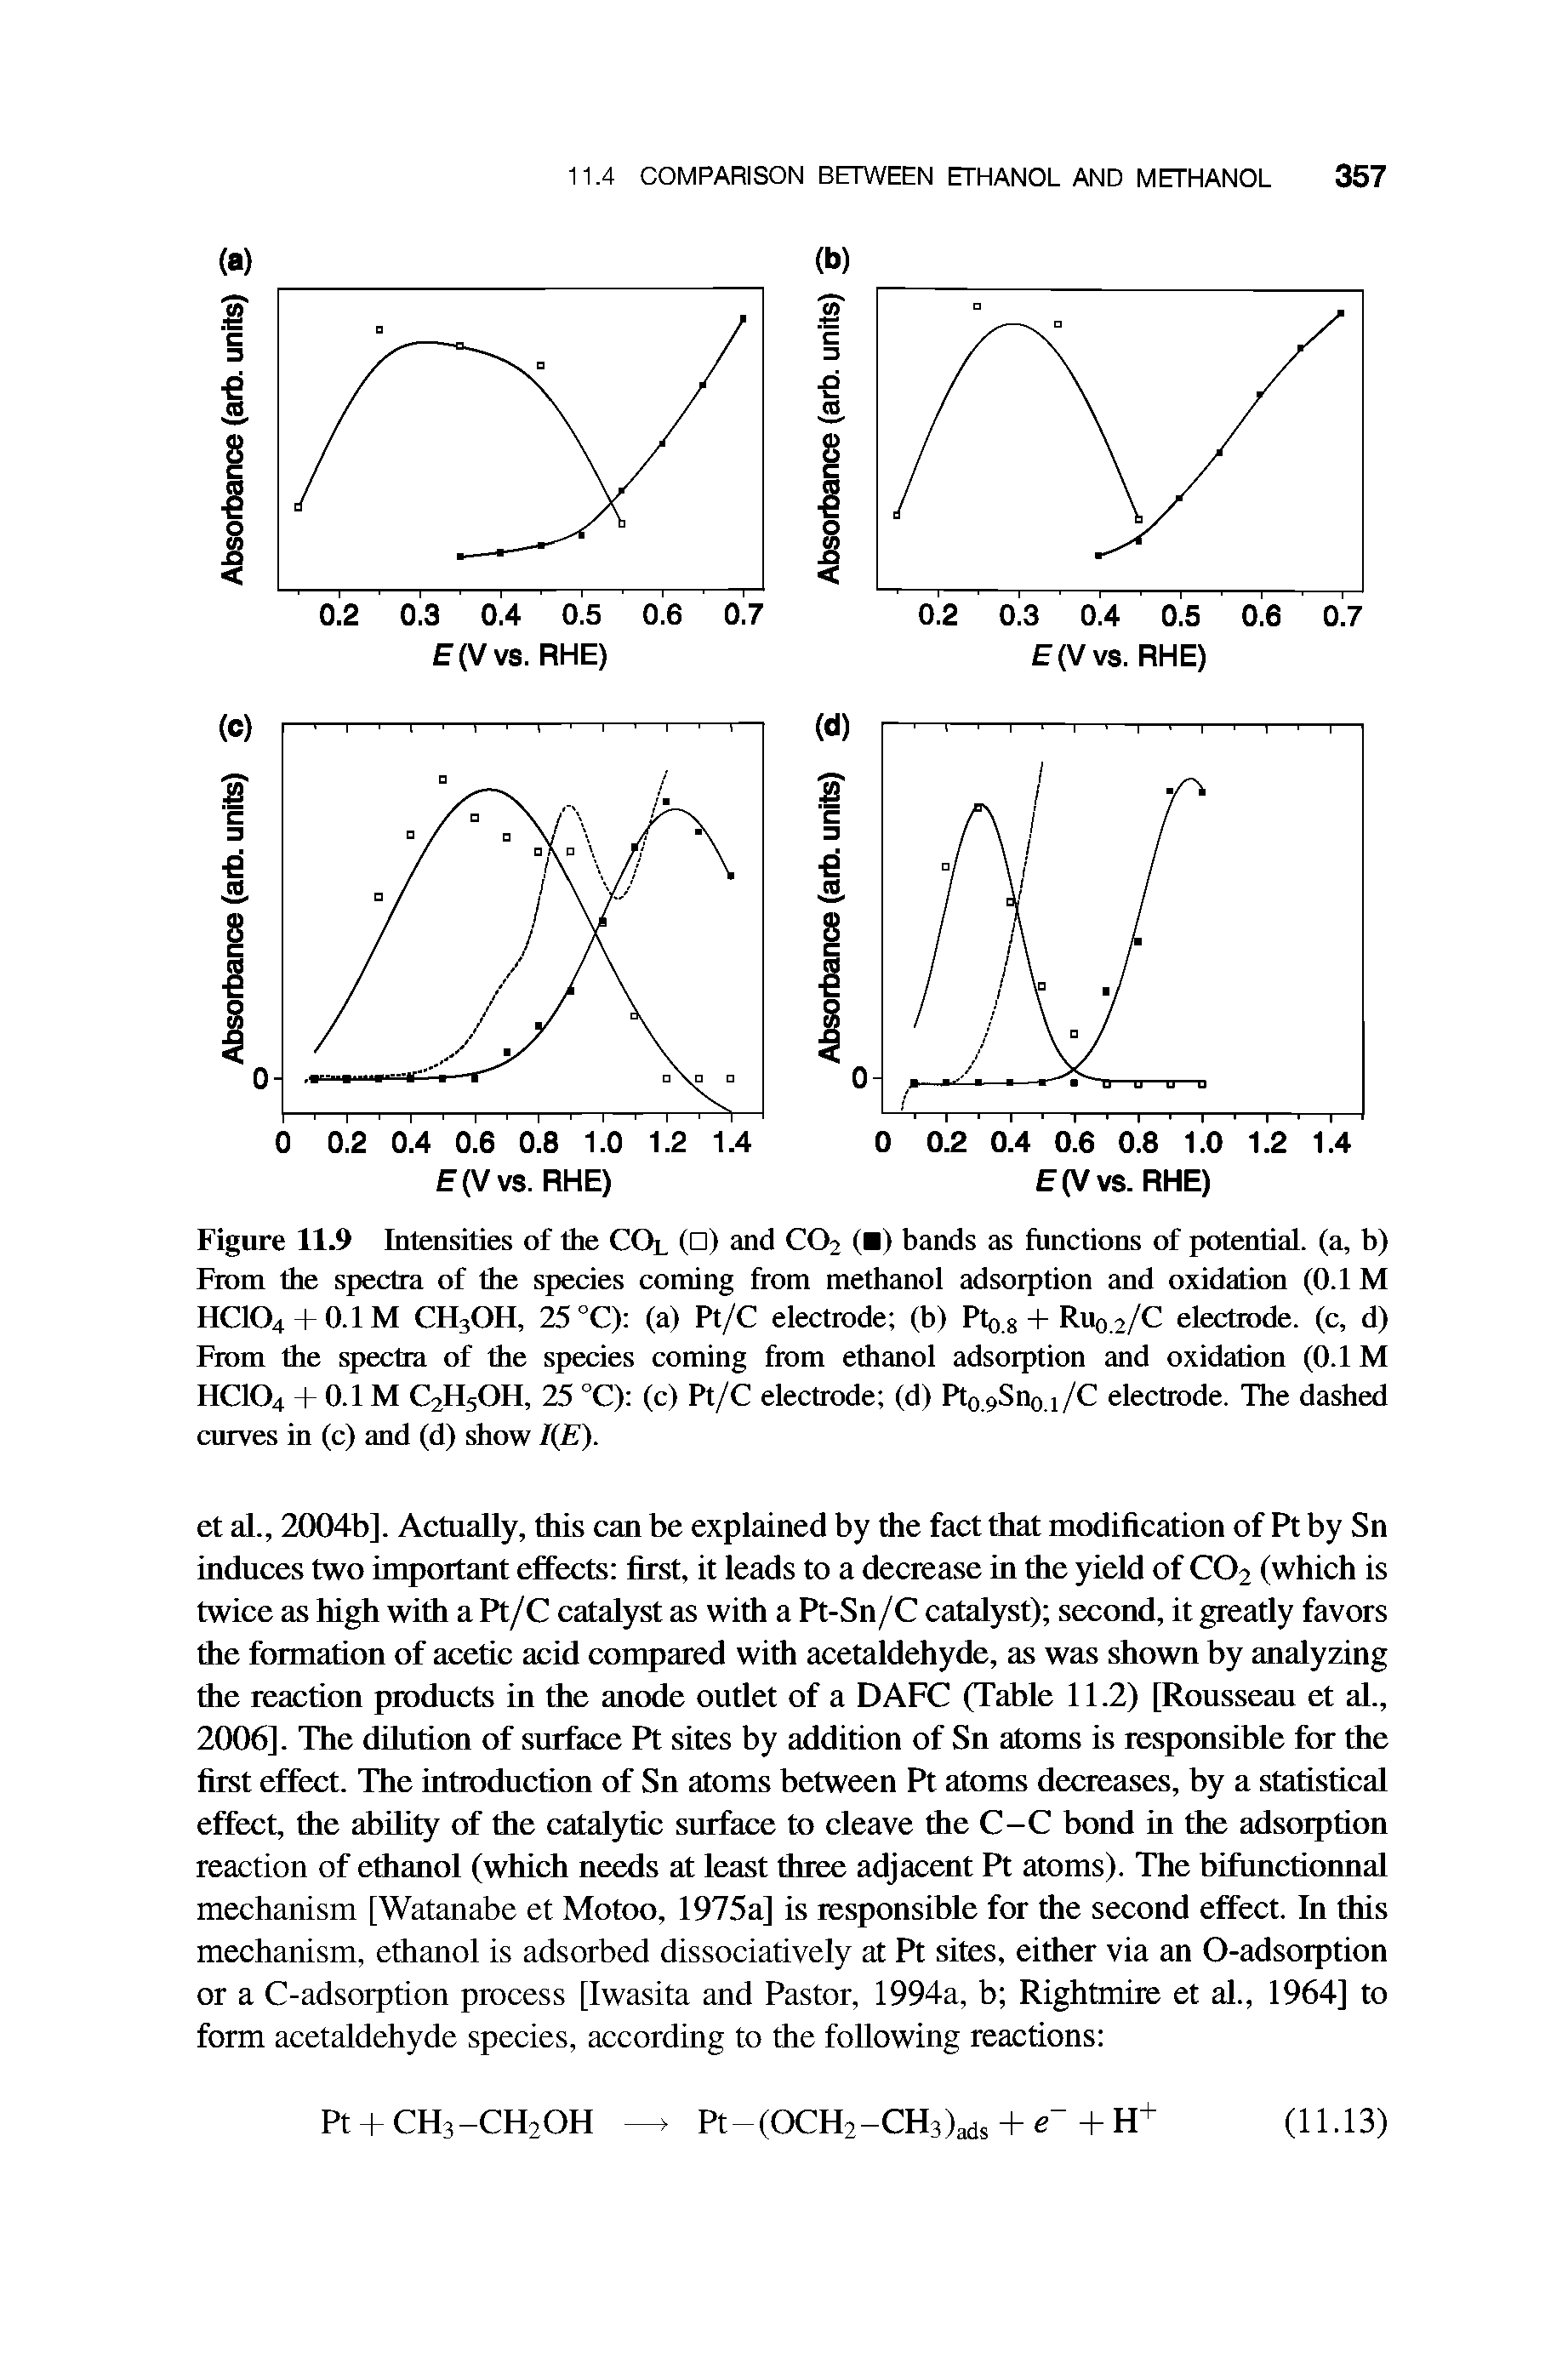 Figure 11.9 Intensities of the COl ( ) and CO2 ( ) bands as functions of potential, (a, b) From the spectra of the species coming from methanol adsorption and oxidation (0.1 M HCIO4 + O.IM CH3OH, 25 °C) (a) Pt/C electrode (b) Pto.g + RU0.2/C electrode, (c, d) From the spectra of the species coming from ethanol adsorption and oxidation (0.1 M HCIO4 + 0.1 M C2H5OH, 25 °C) (c) Pt/C electrode (d) Pto.pSno.i/C electrode. The dashed curves in (c) and (d) show I E).